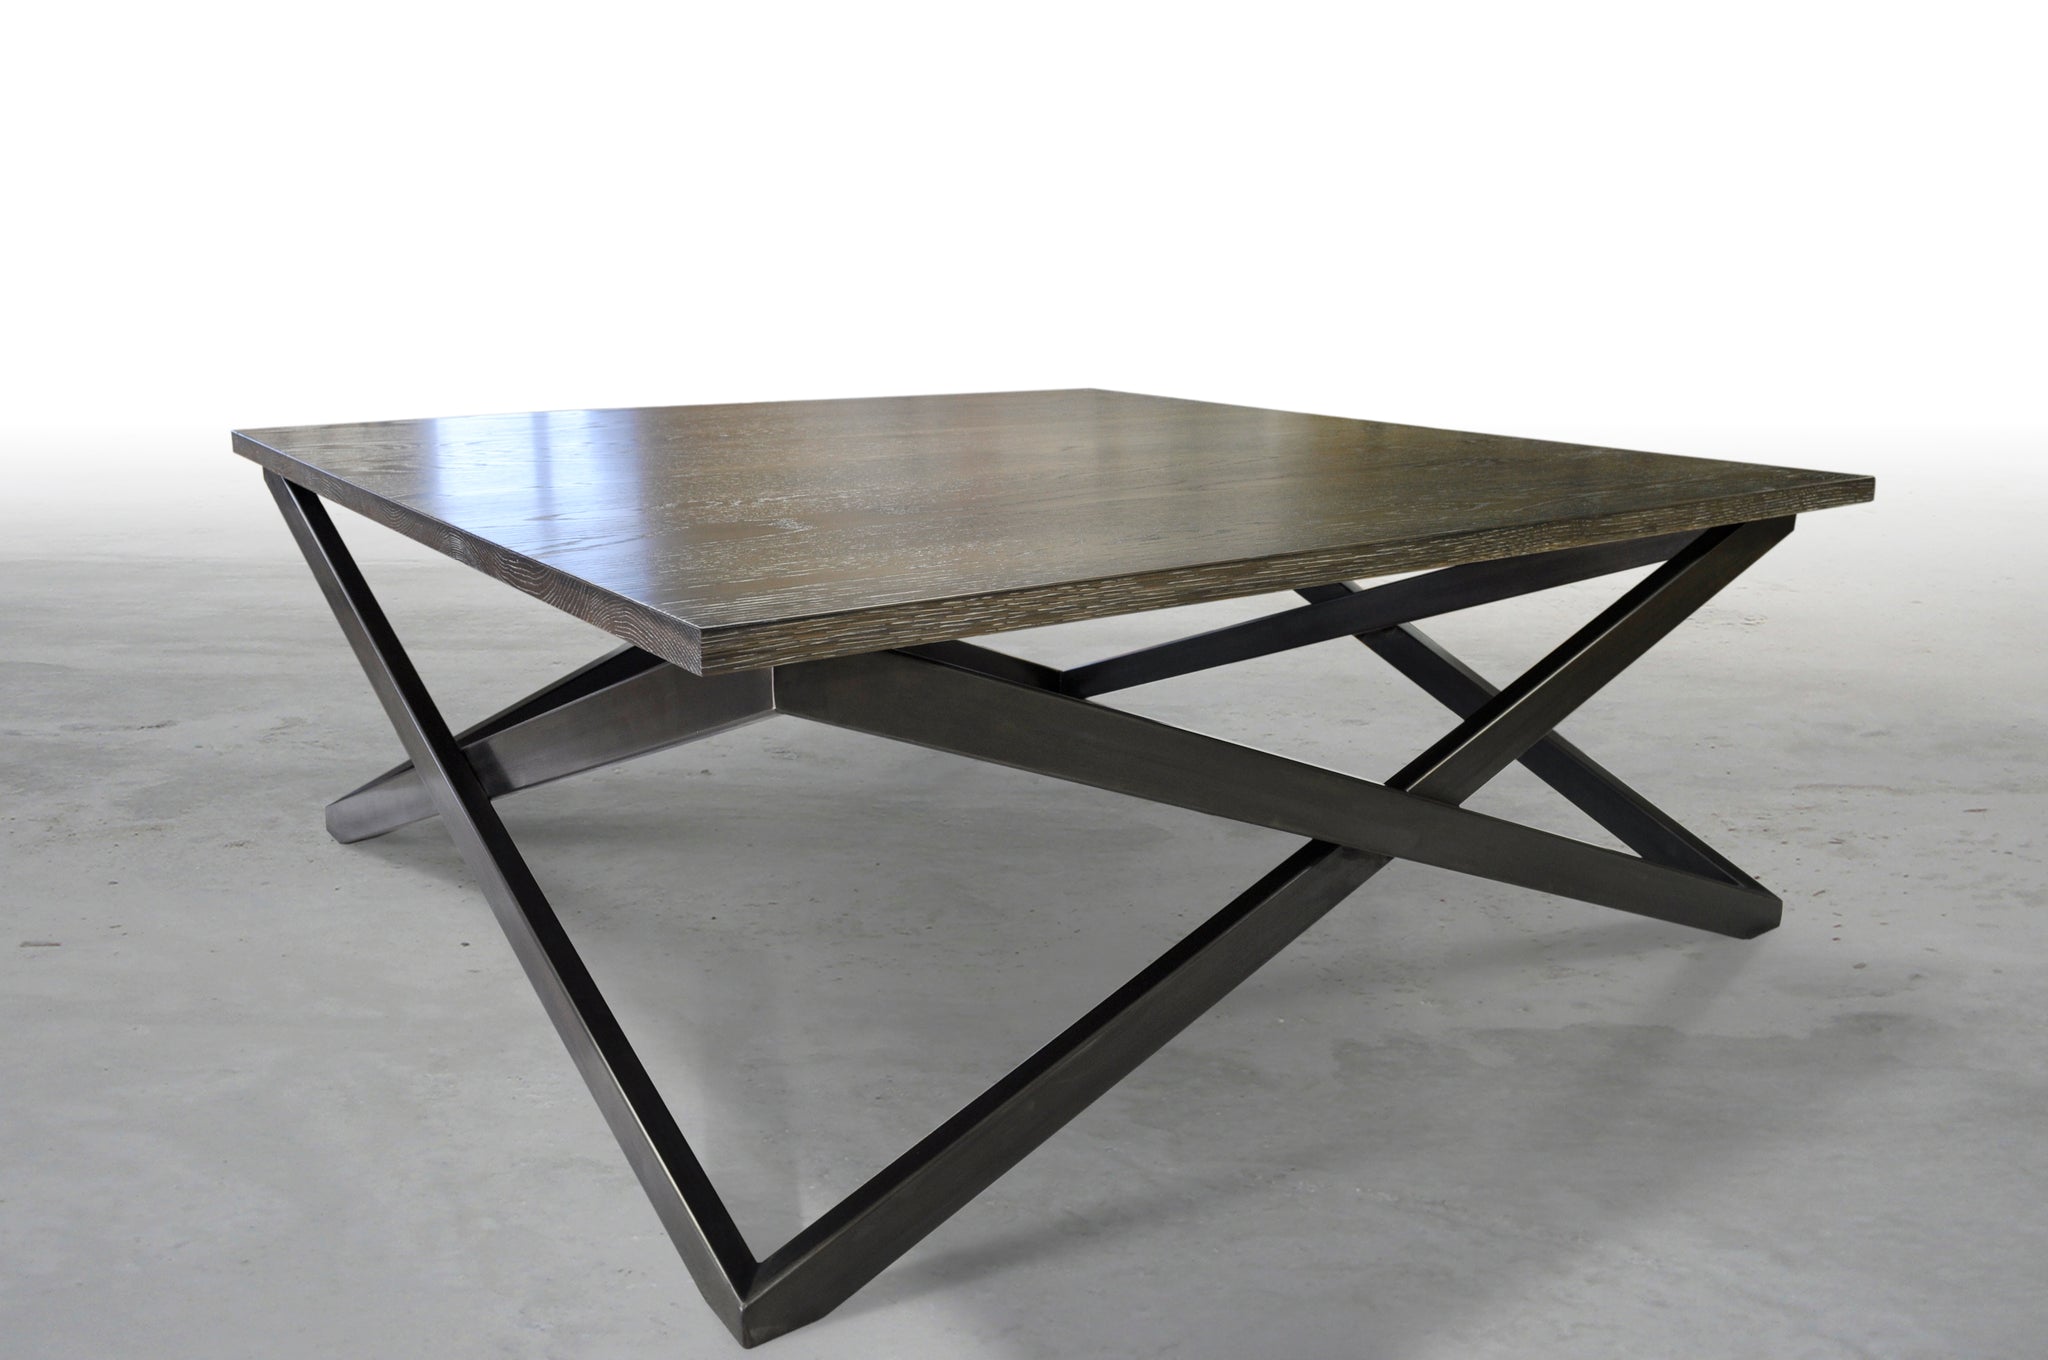 THE SQUARE X-COFFEE TABLE